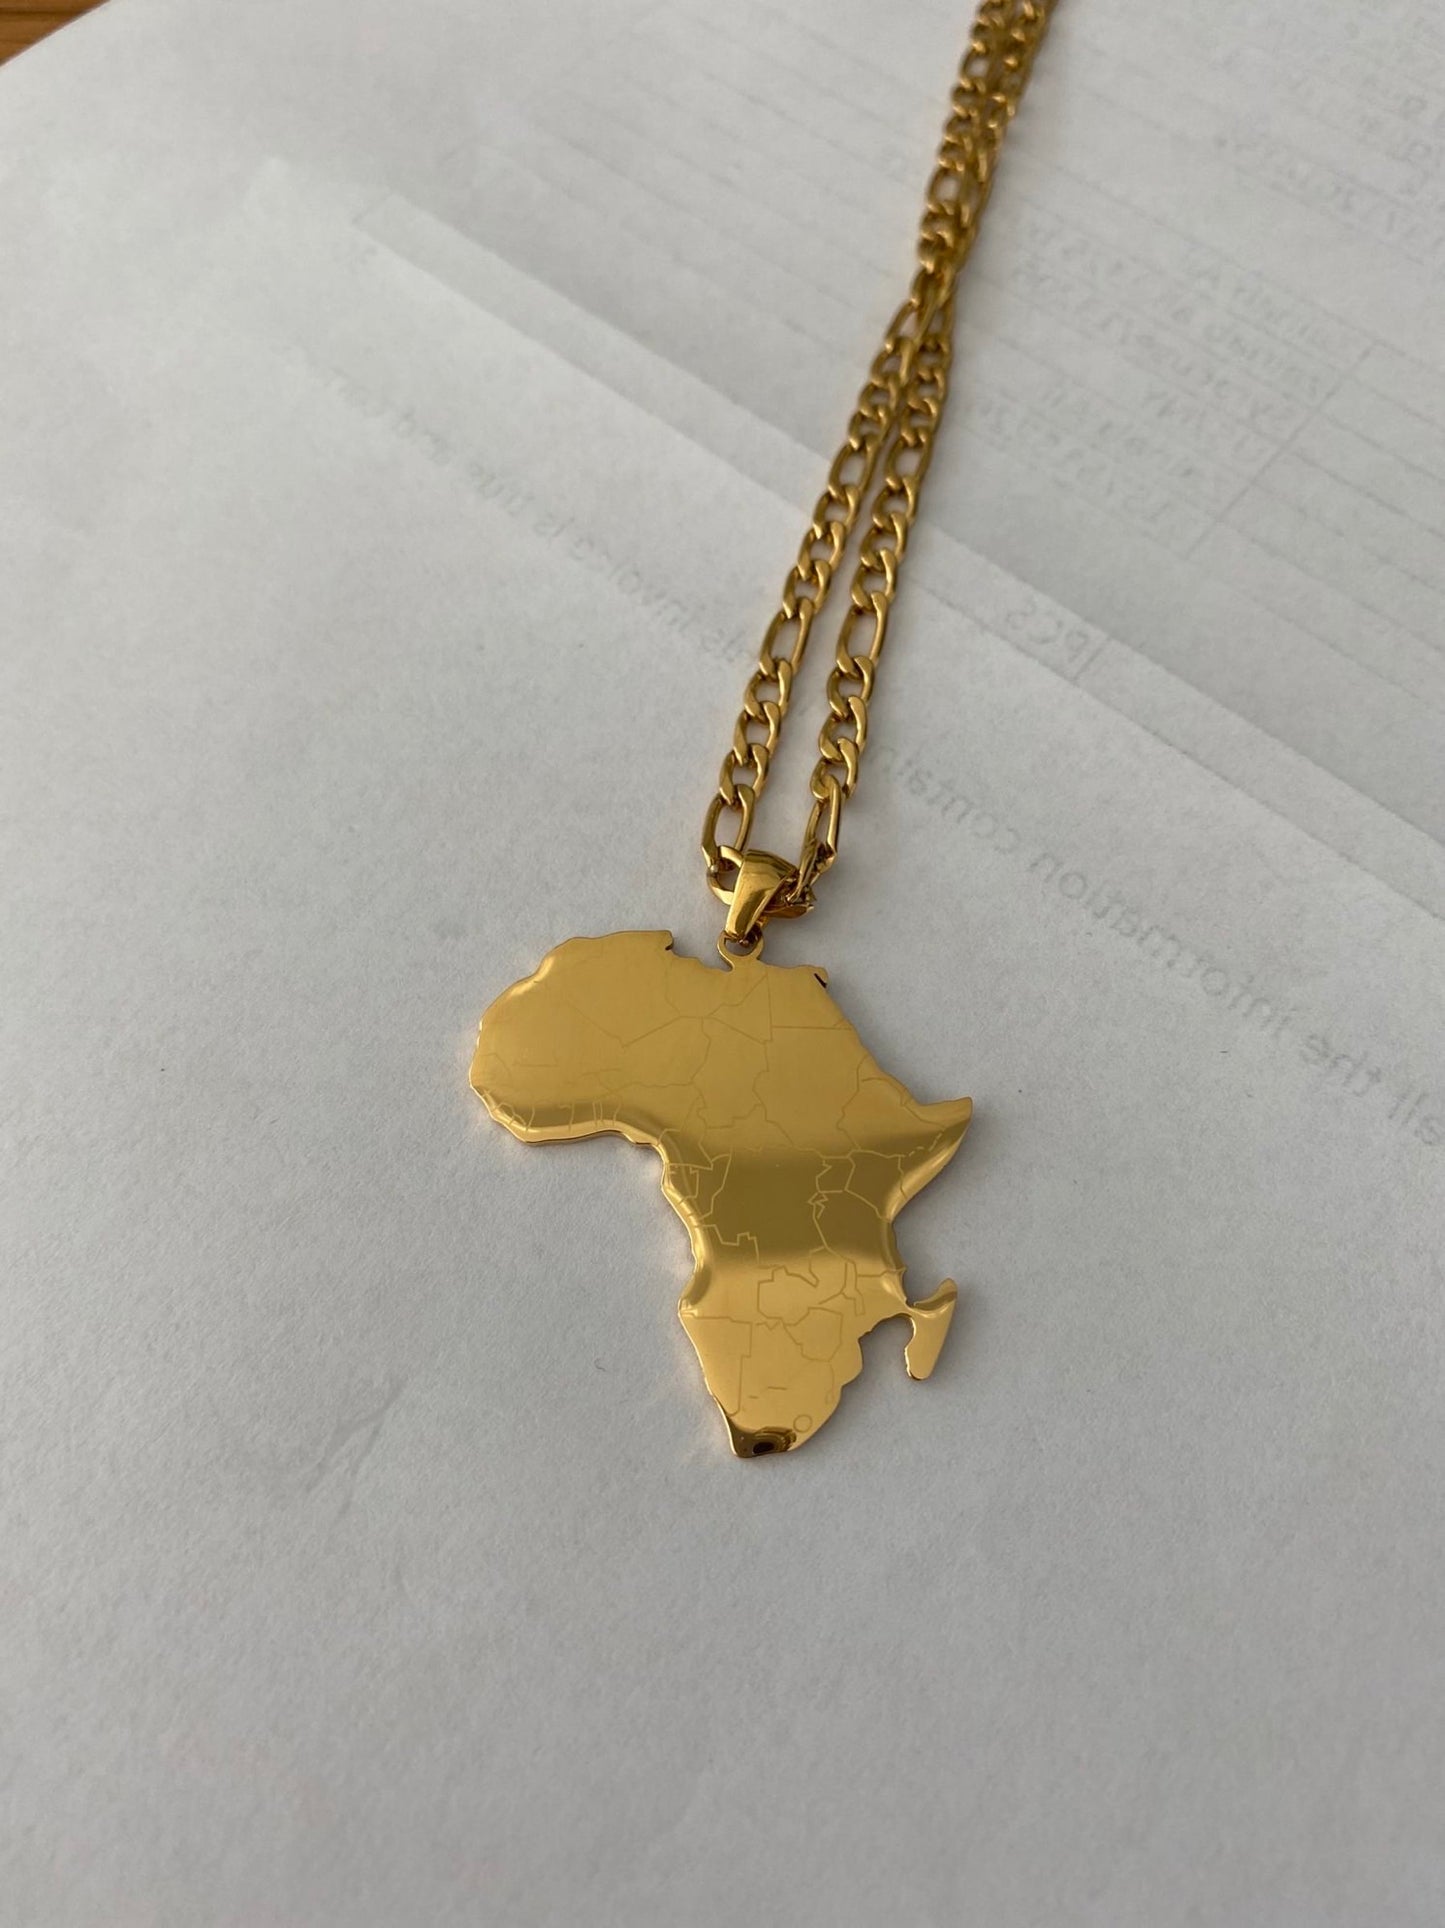 Africa shaped necklace